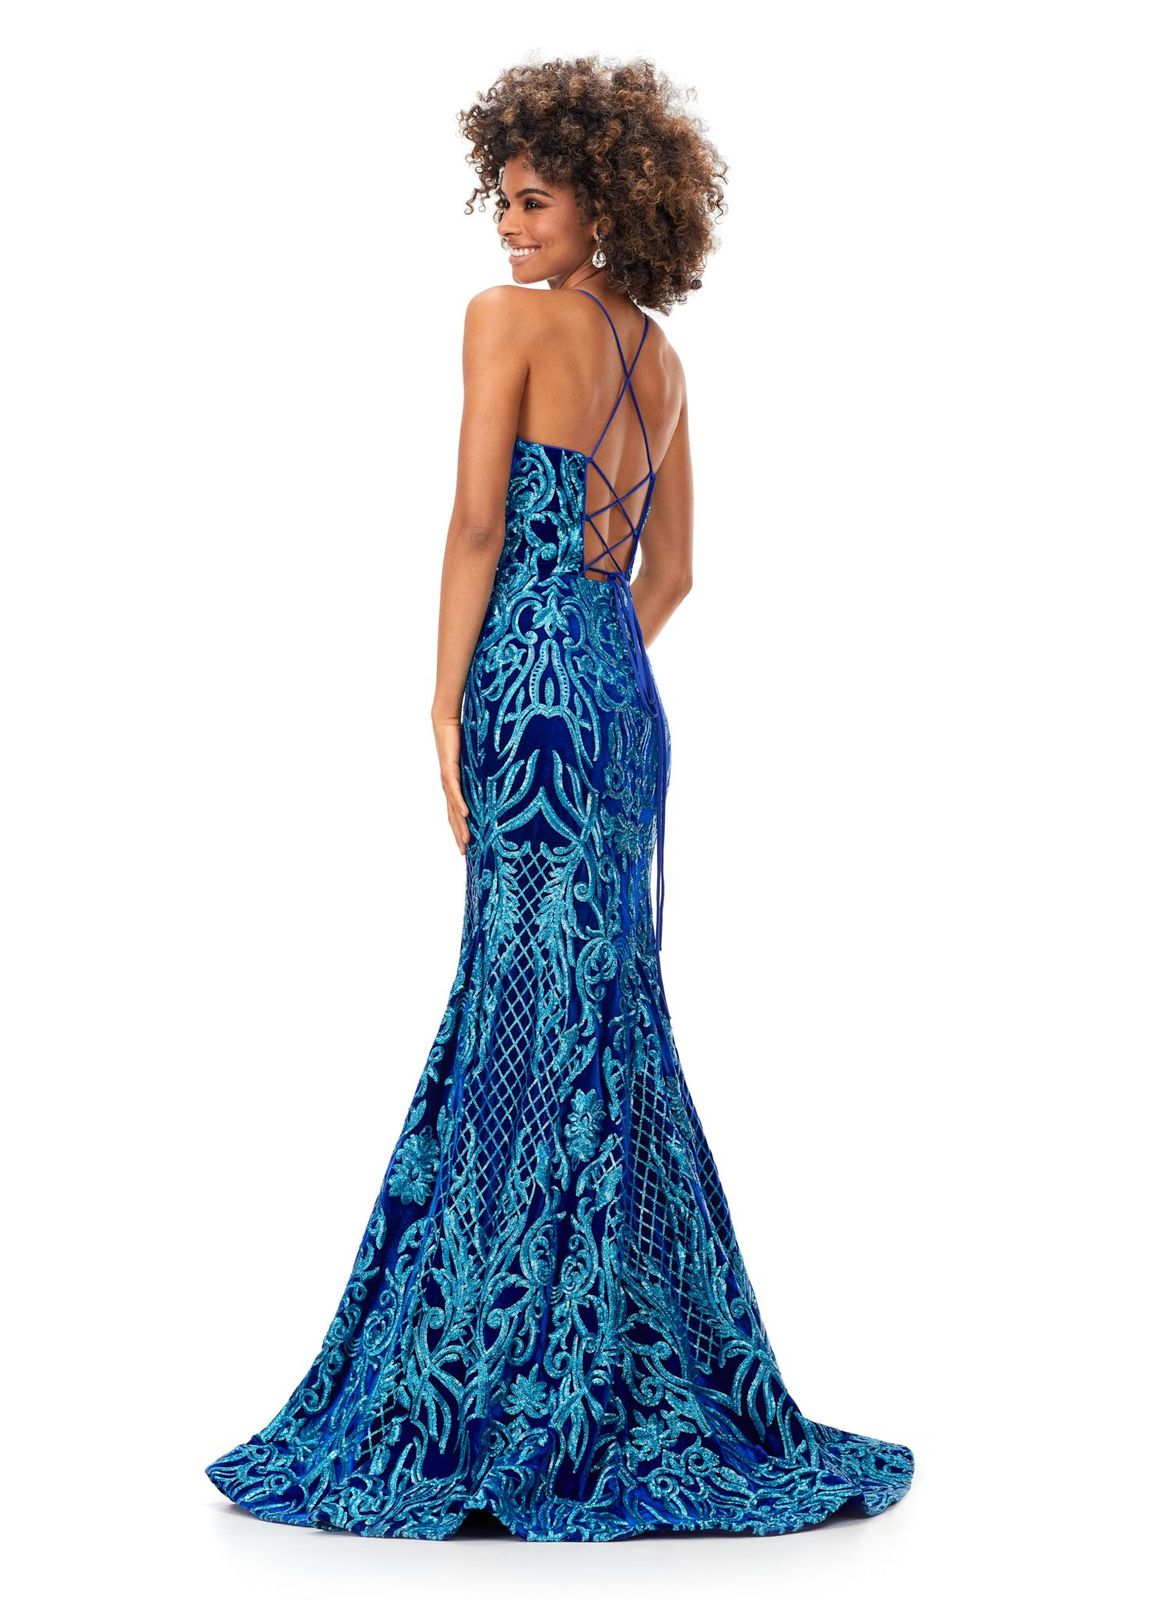 Ashley Lauren 11331 Make an entrance in this velvet sequin gown. The spaghetti straps are sure to provide the perfect fit. The sequin applique is perfectly placed throughout the gown to compliment your curves. The look is complete with a sweep train. Spaghetti Straps Lace Up Back Sweep Train Velvet Sequin COLORS: Blue, Fuchsia/Black, Turquoise/Royal